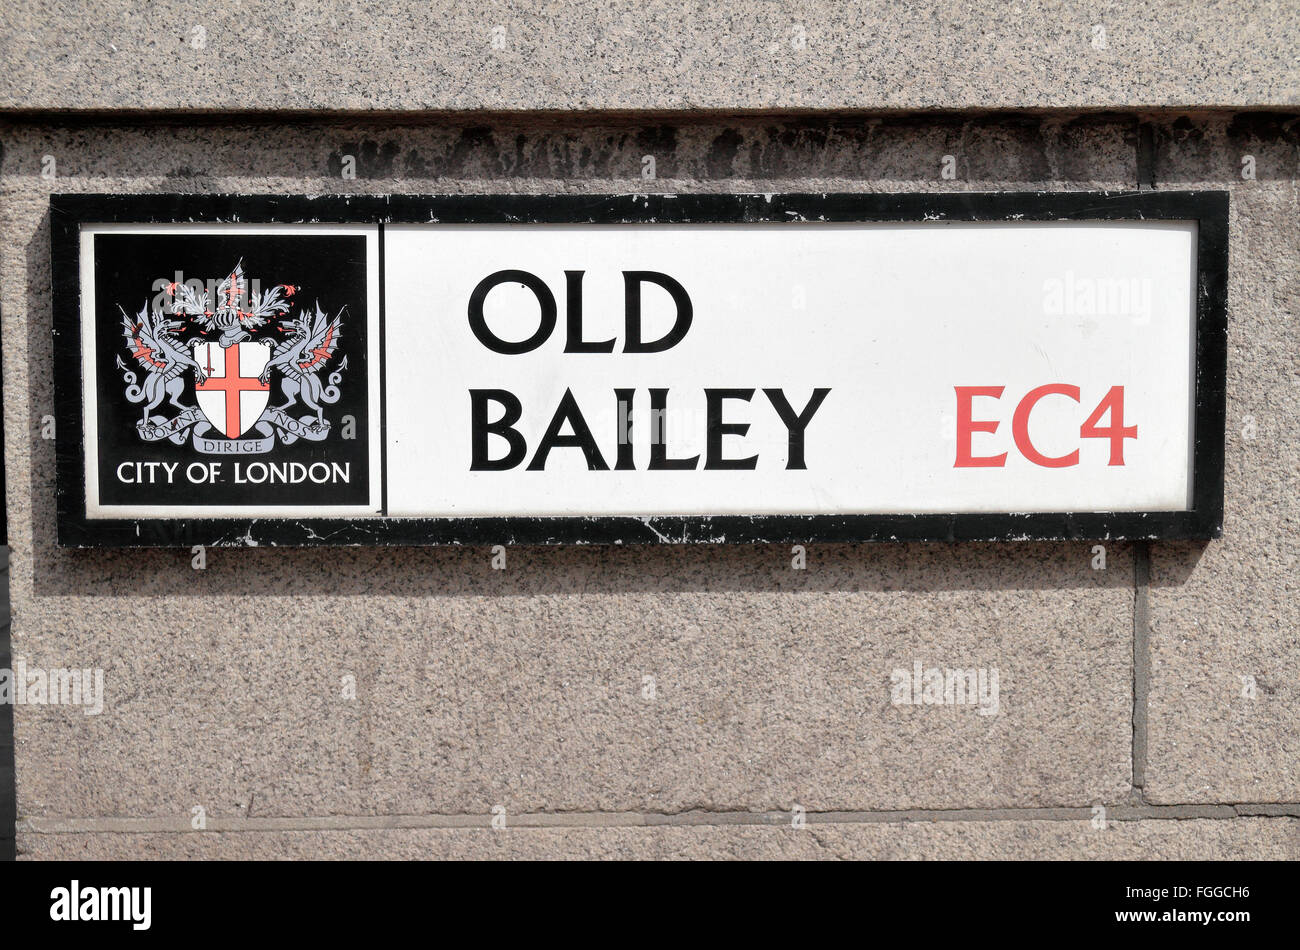 Street sign for Old Bailey, London, EC4, UK. Stock Photo